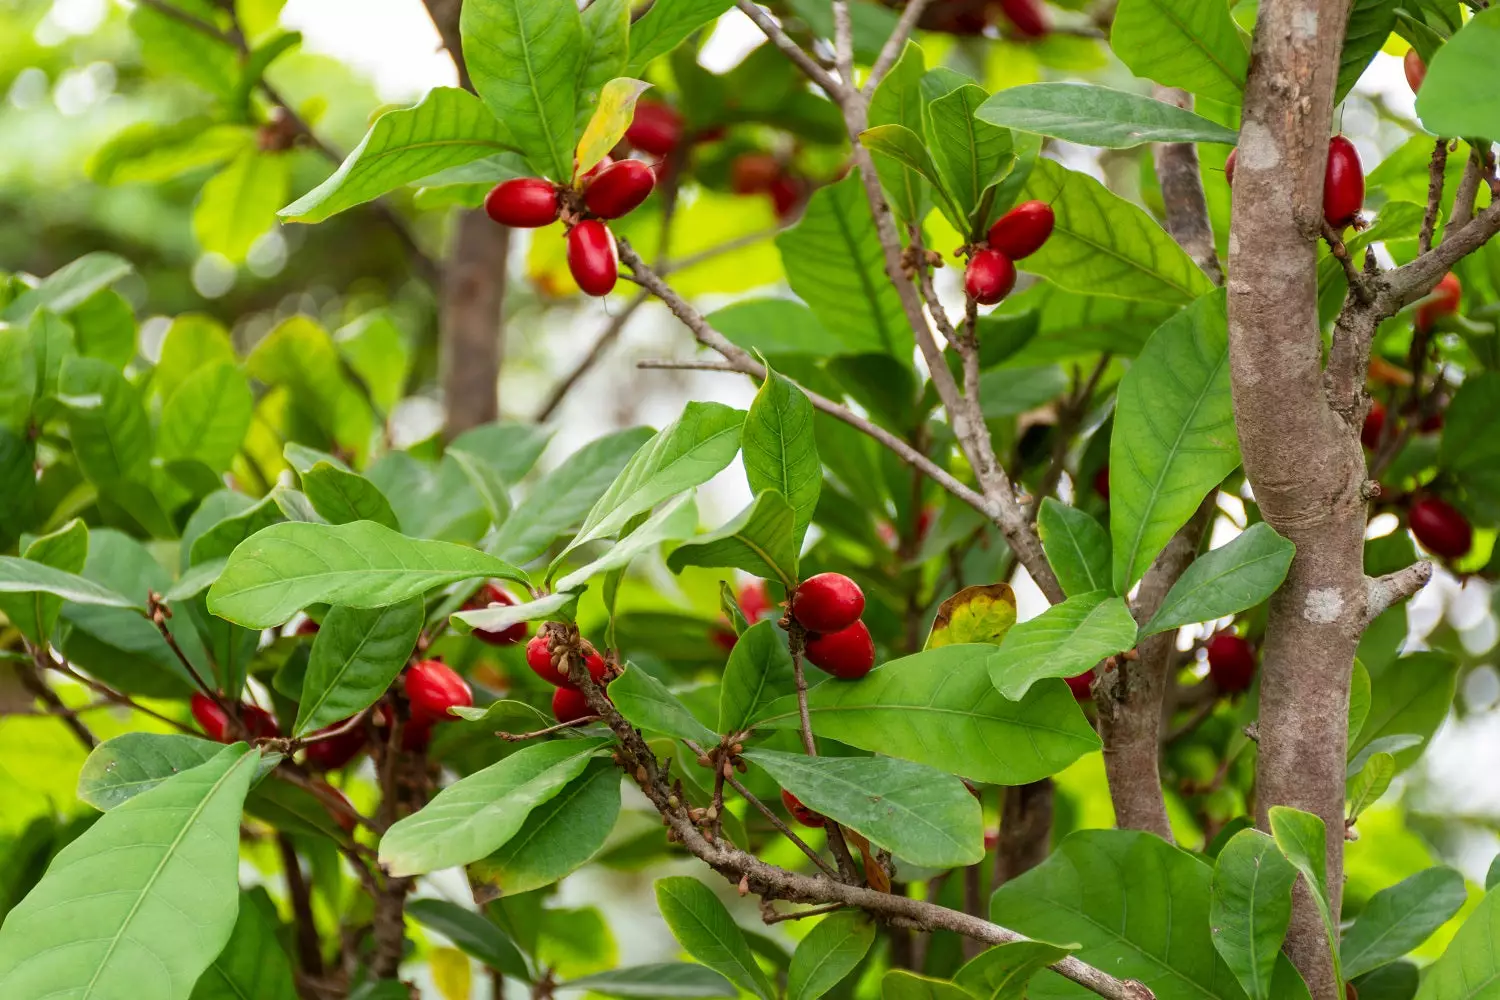 Miracle Fruit Plants for Sale   Buying & Growing Guide   Trees.com